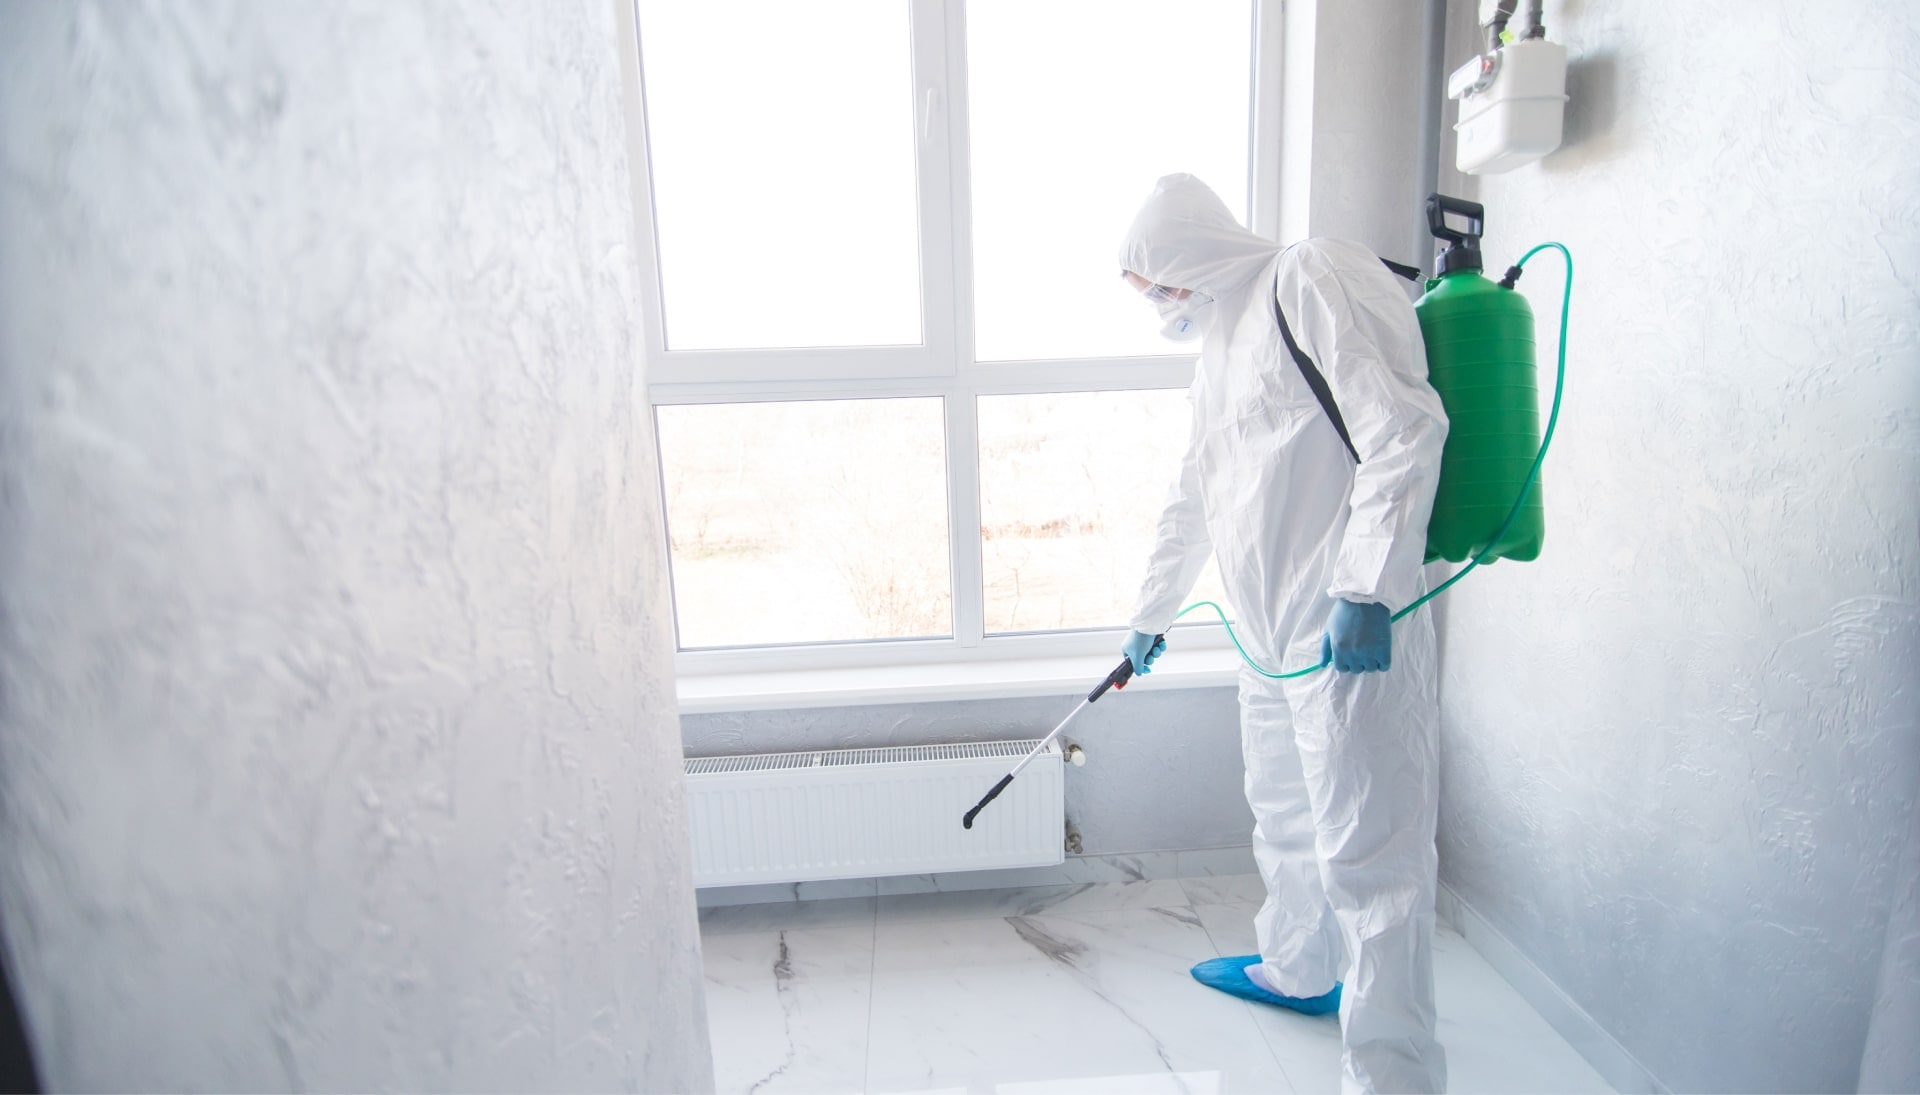 We provide the highest-quality mold inspection, testing, and removal services in the Provo, Utah area.